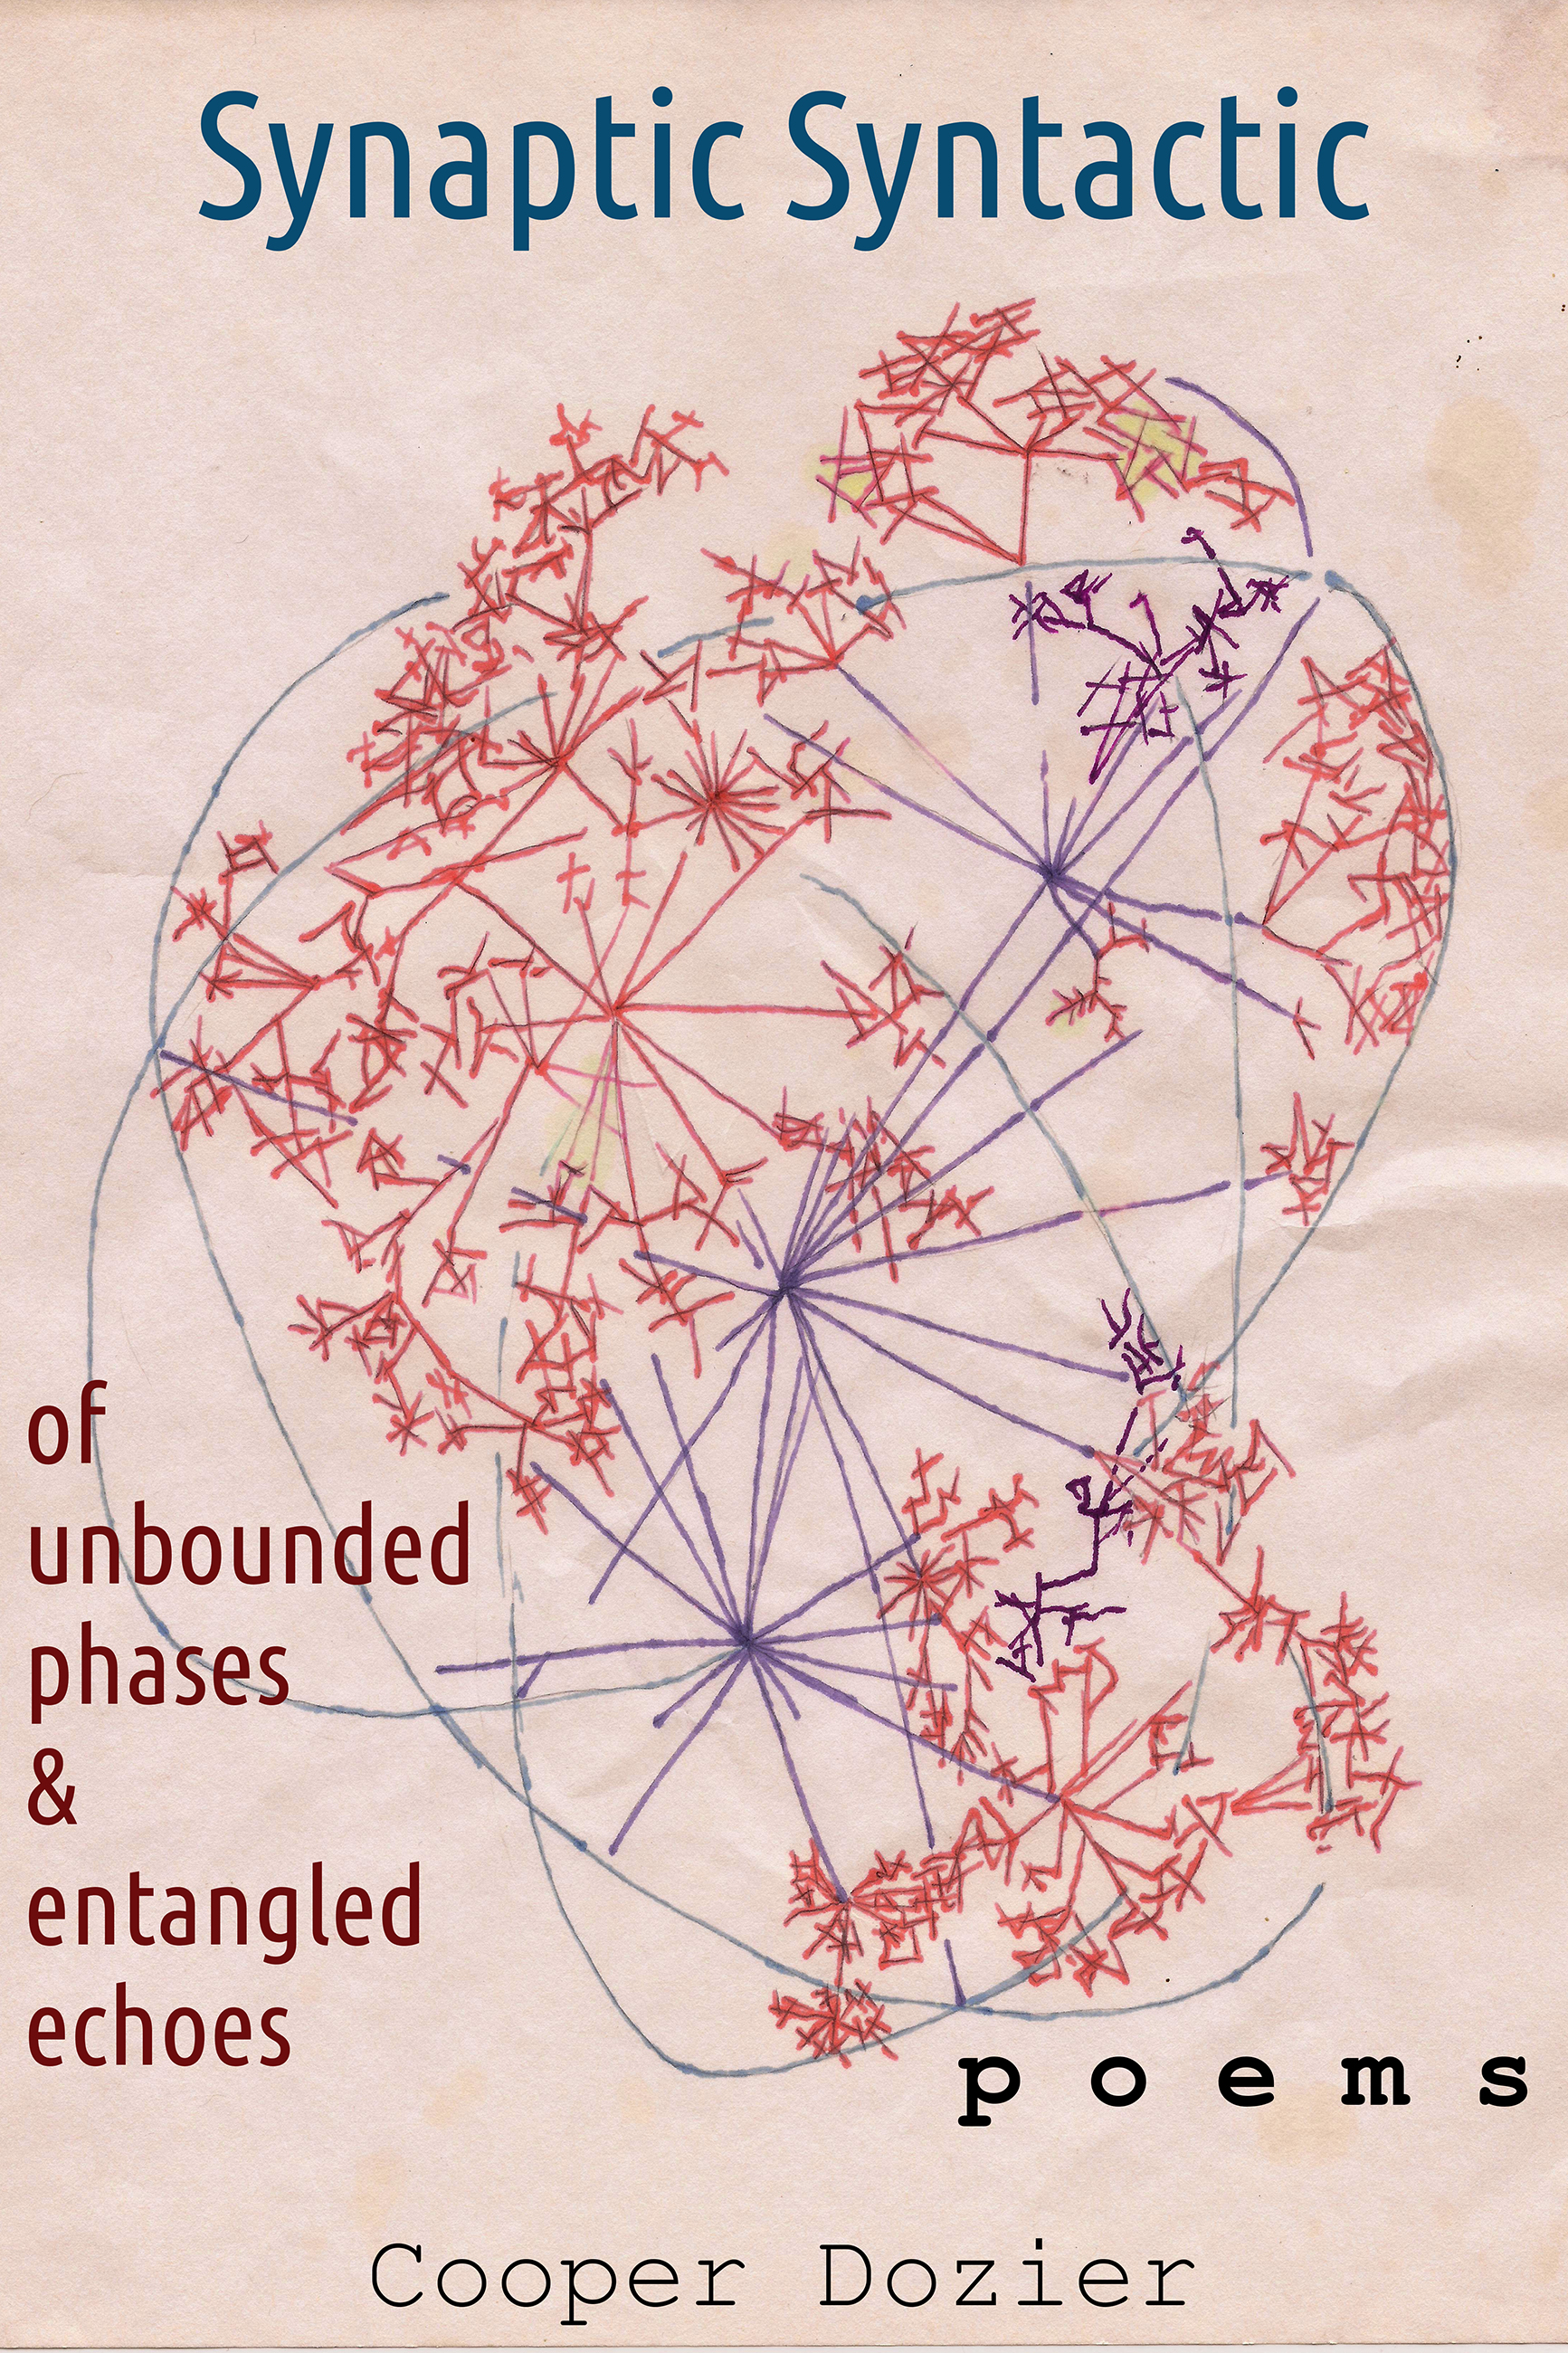 Cover design with network diagram or neural network like line drawing saying 'Synaptic Syntactic: of unbounded phases and entangled echoes - Cooper Dozier - poems'